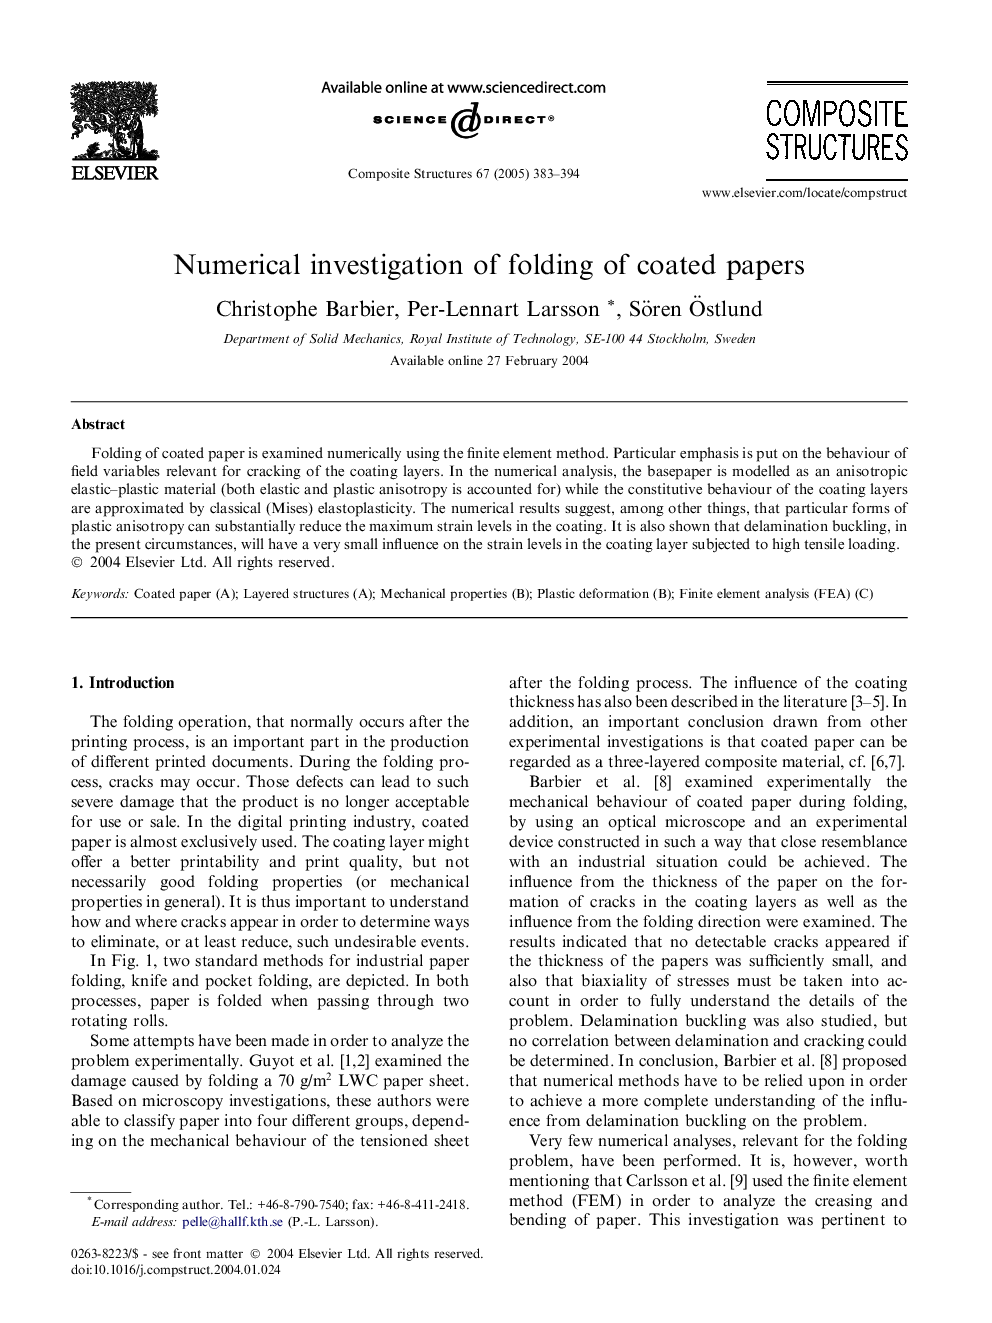 Numerical investigation of folding of coated papers